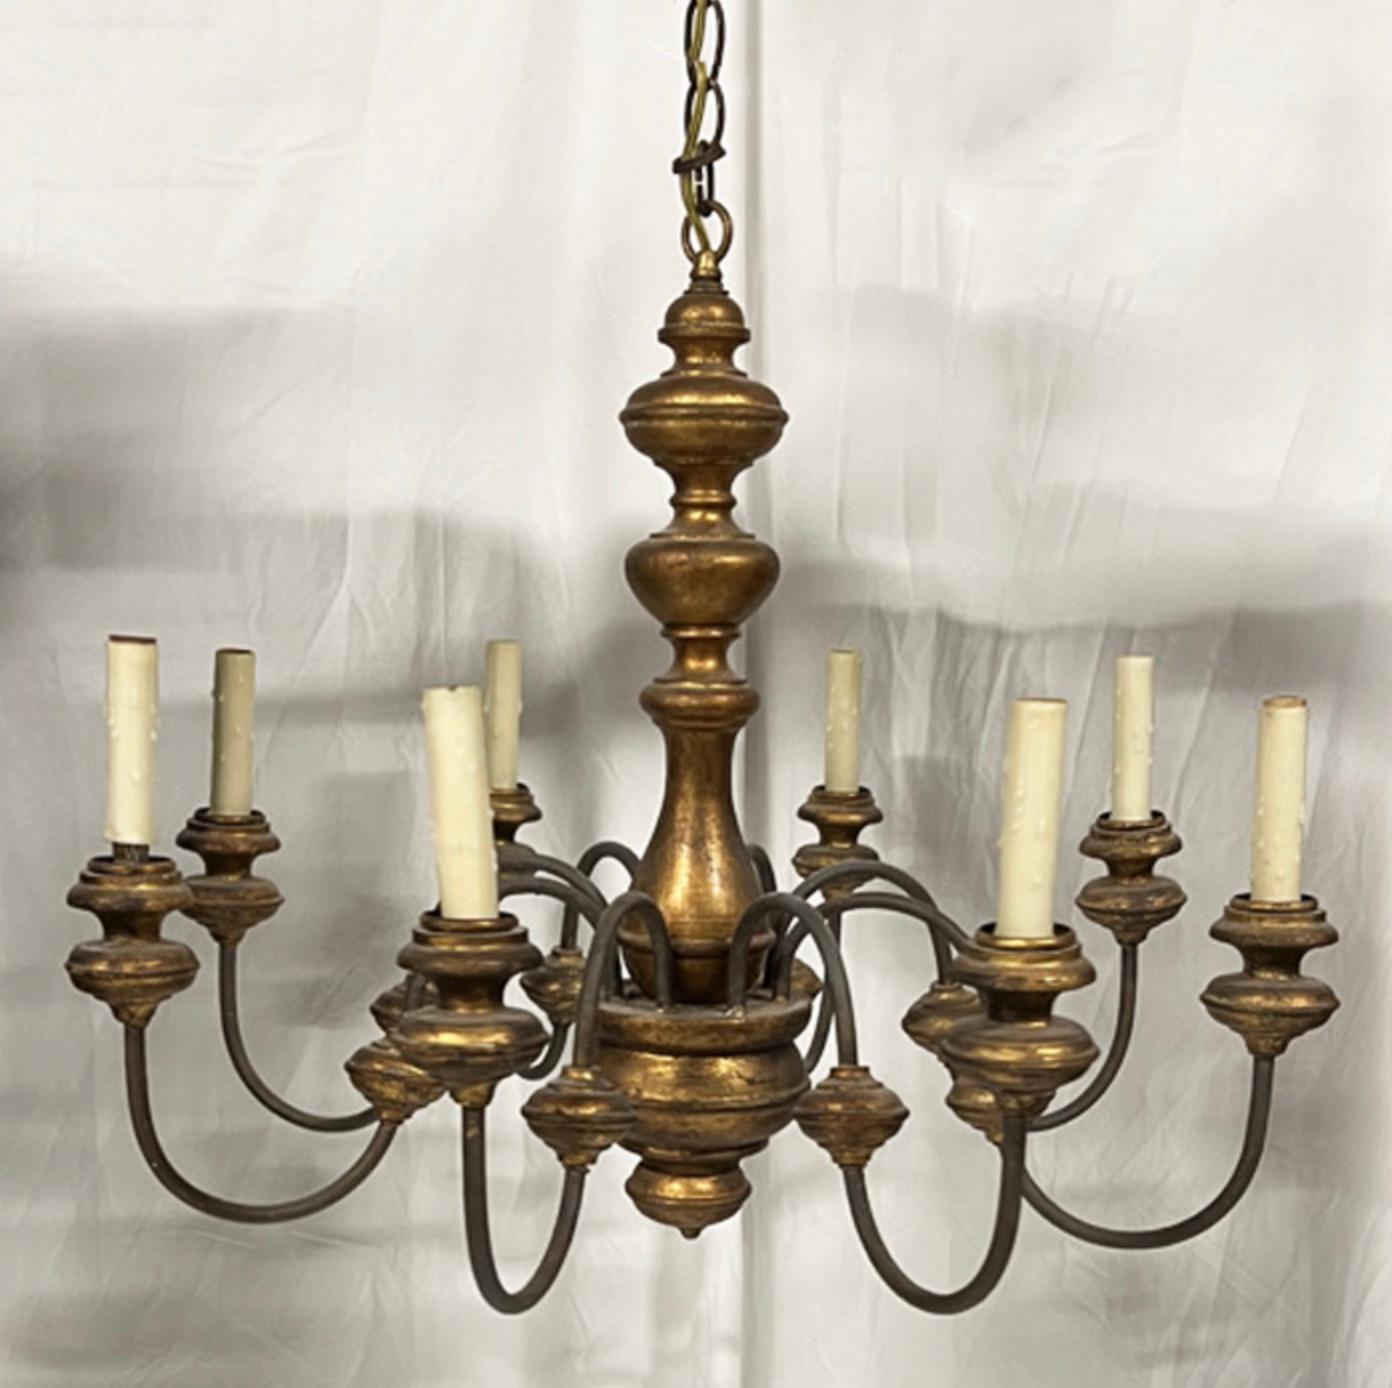 20th Century Rustic Antique Painted Wood and Gilt Chandelier